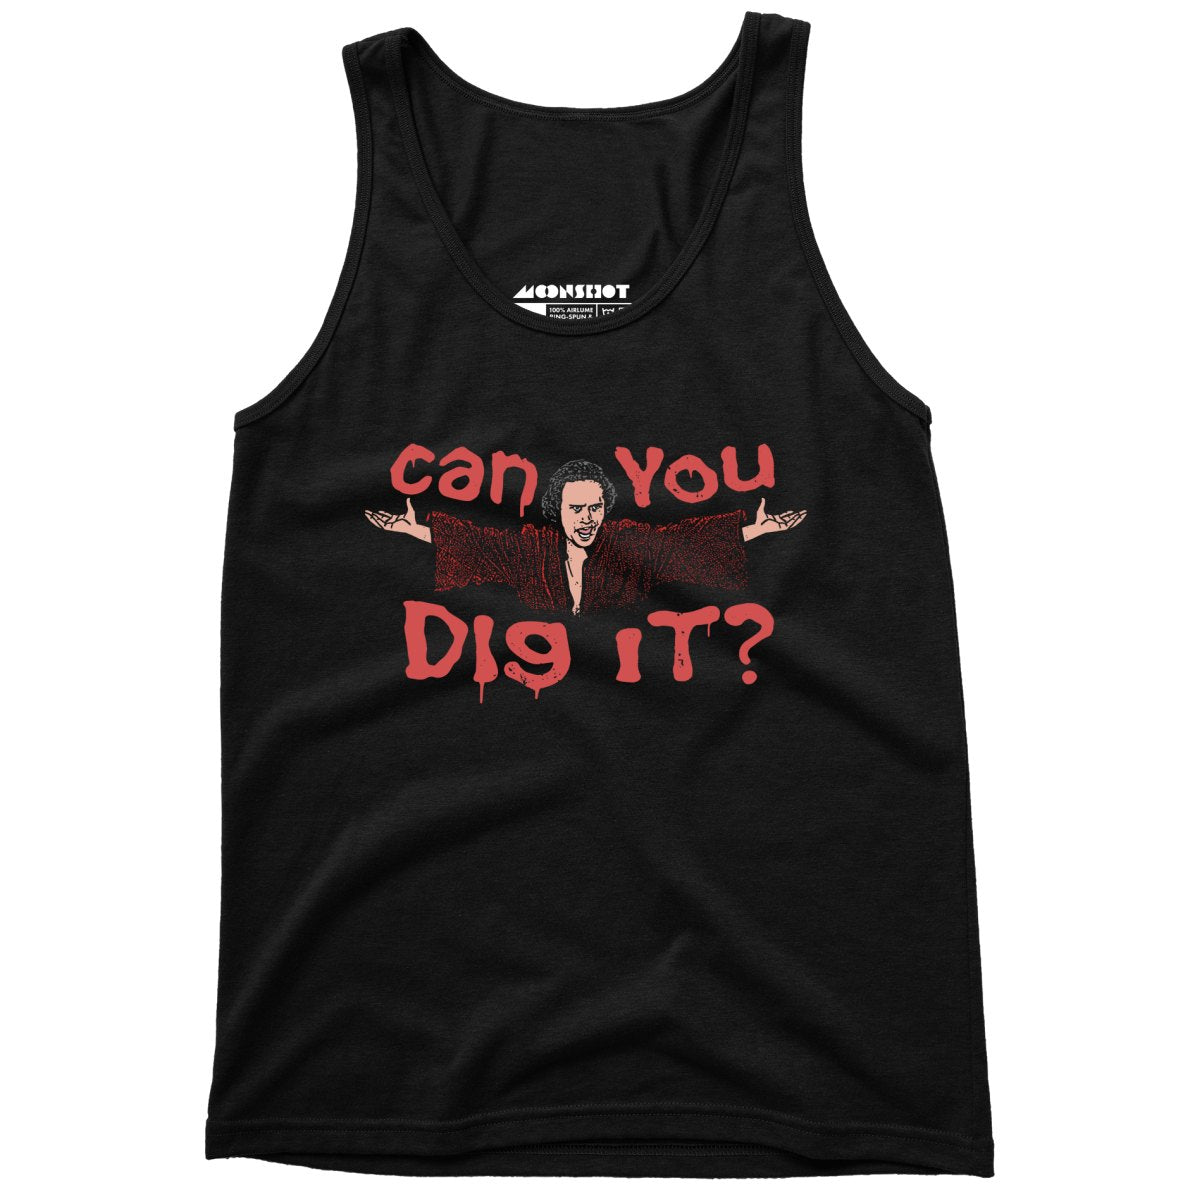 Can You Dig It? - Unisex Tank Top